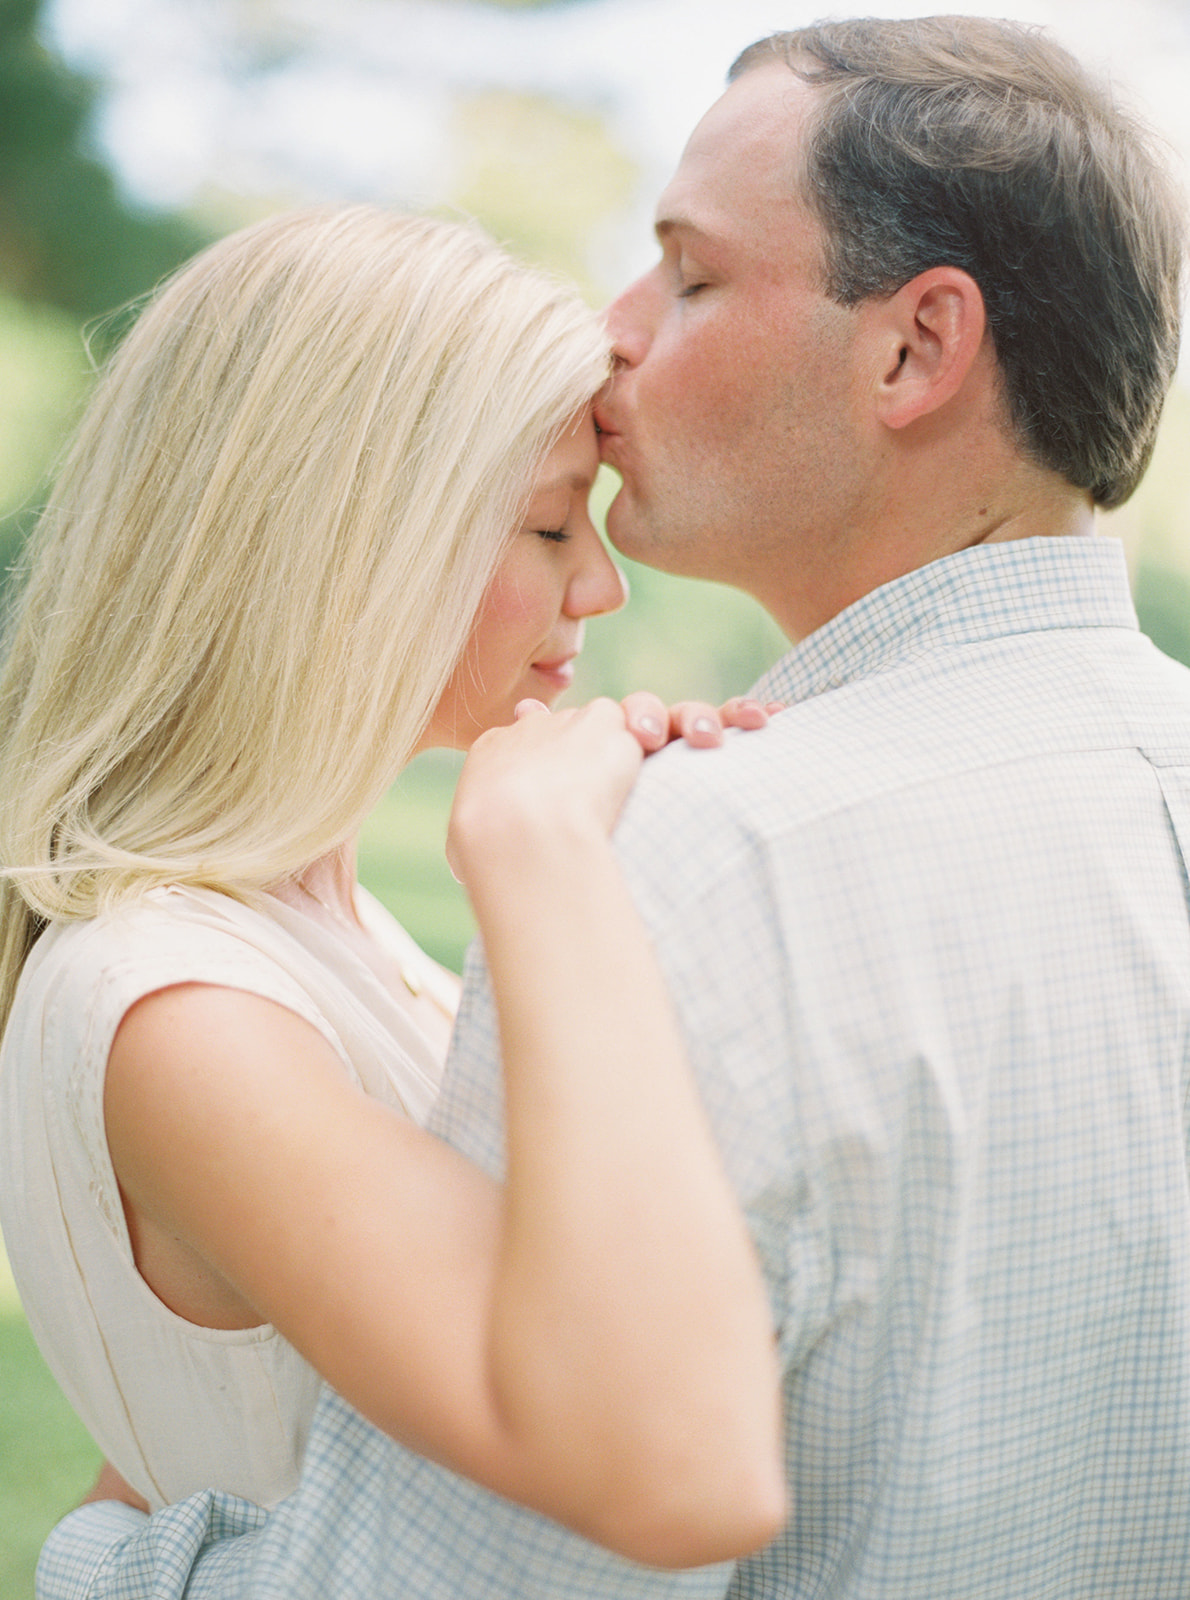 Engagement Session couple kissing on forehead during golden hour in Thomasville, Georgia. Film using Contax645